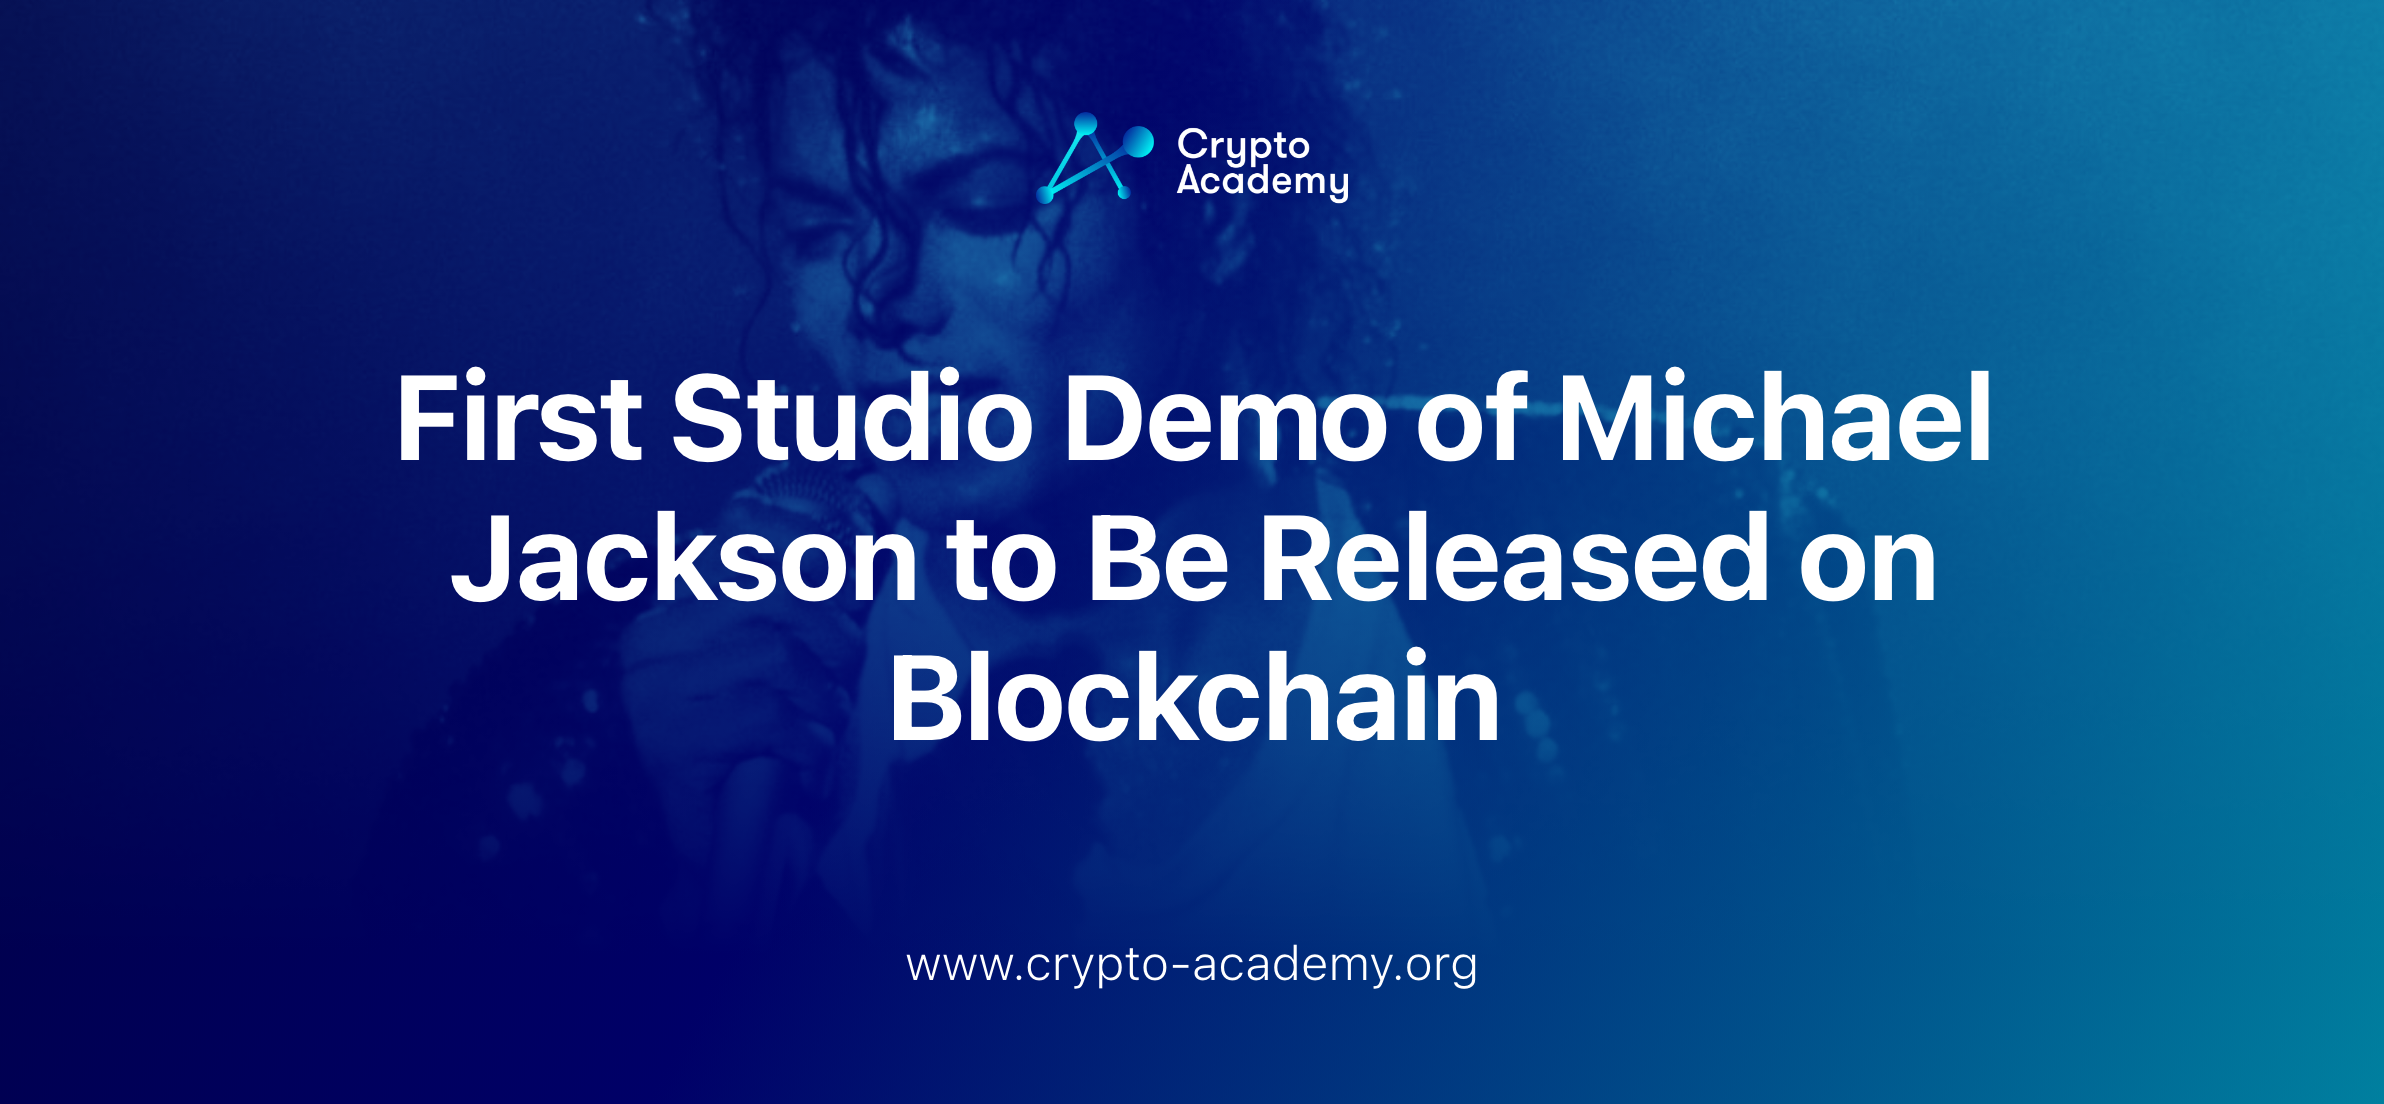 First Studio Demo of Michael Jackson to Be Released on Blockchain